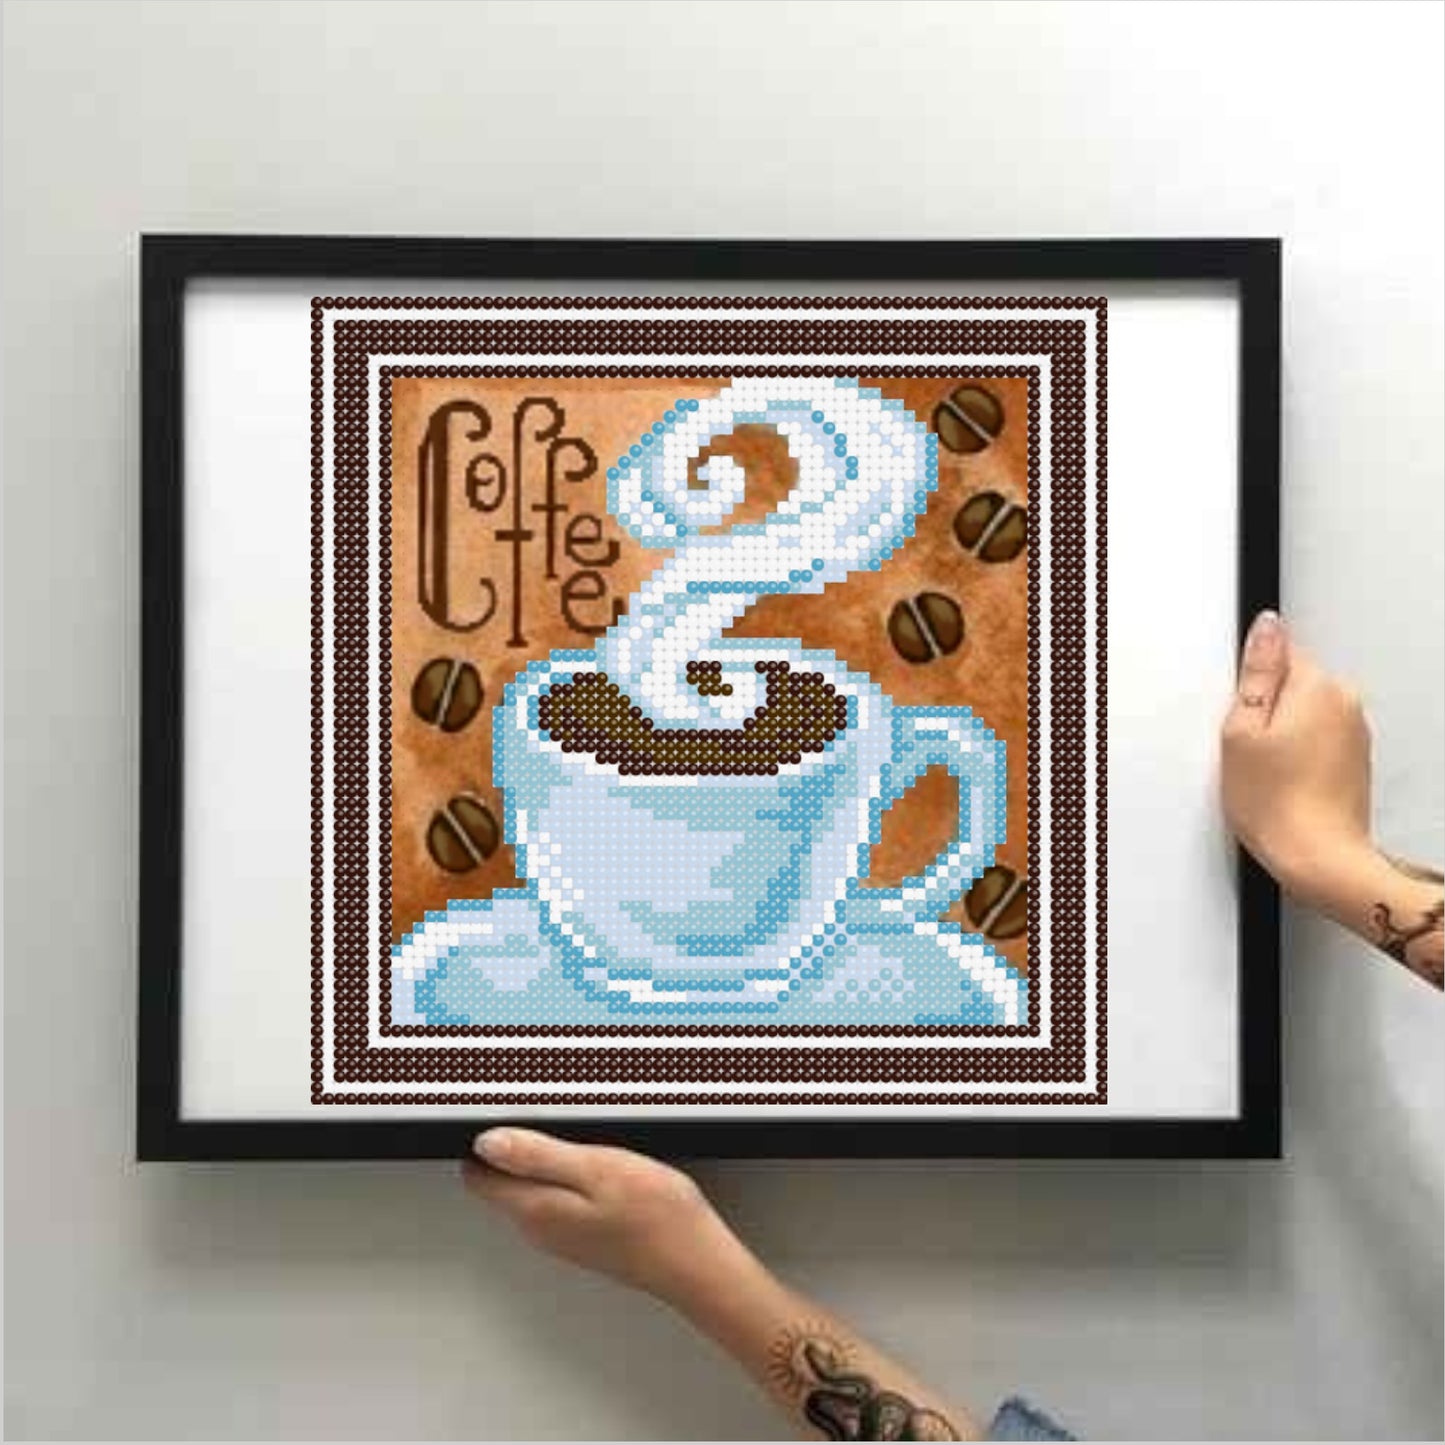 DIY Bead embroidery kit "Cup of coffee". Size: 6.3 - 6.3in (16 - 16cm). - VadymShop